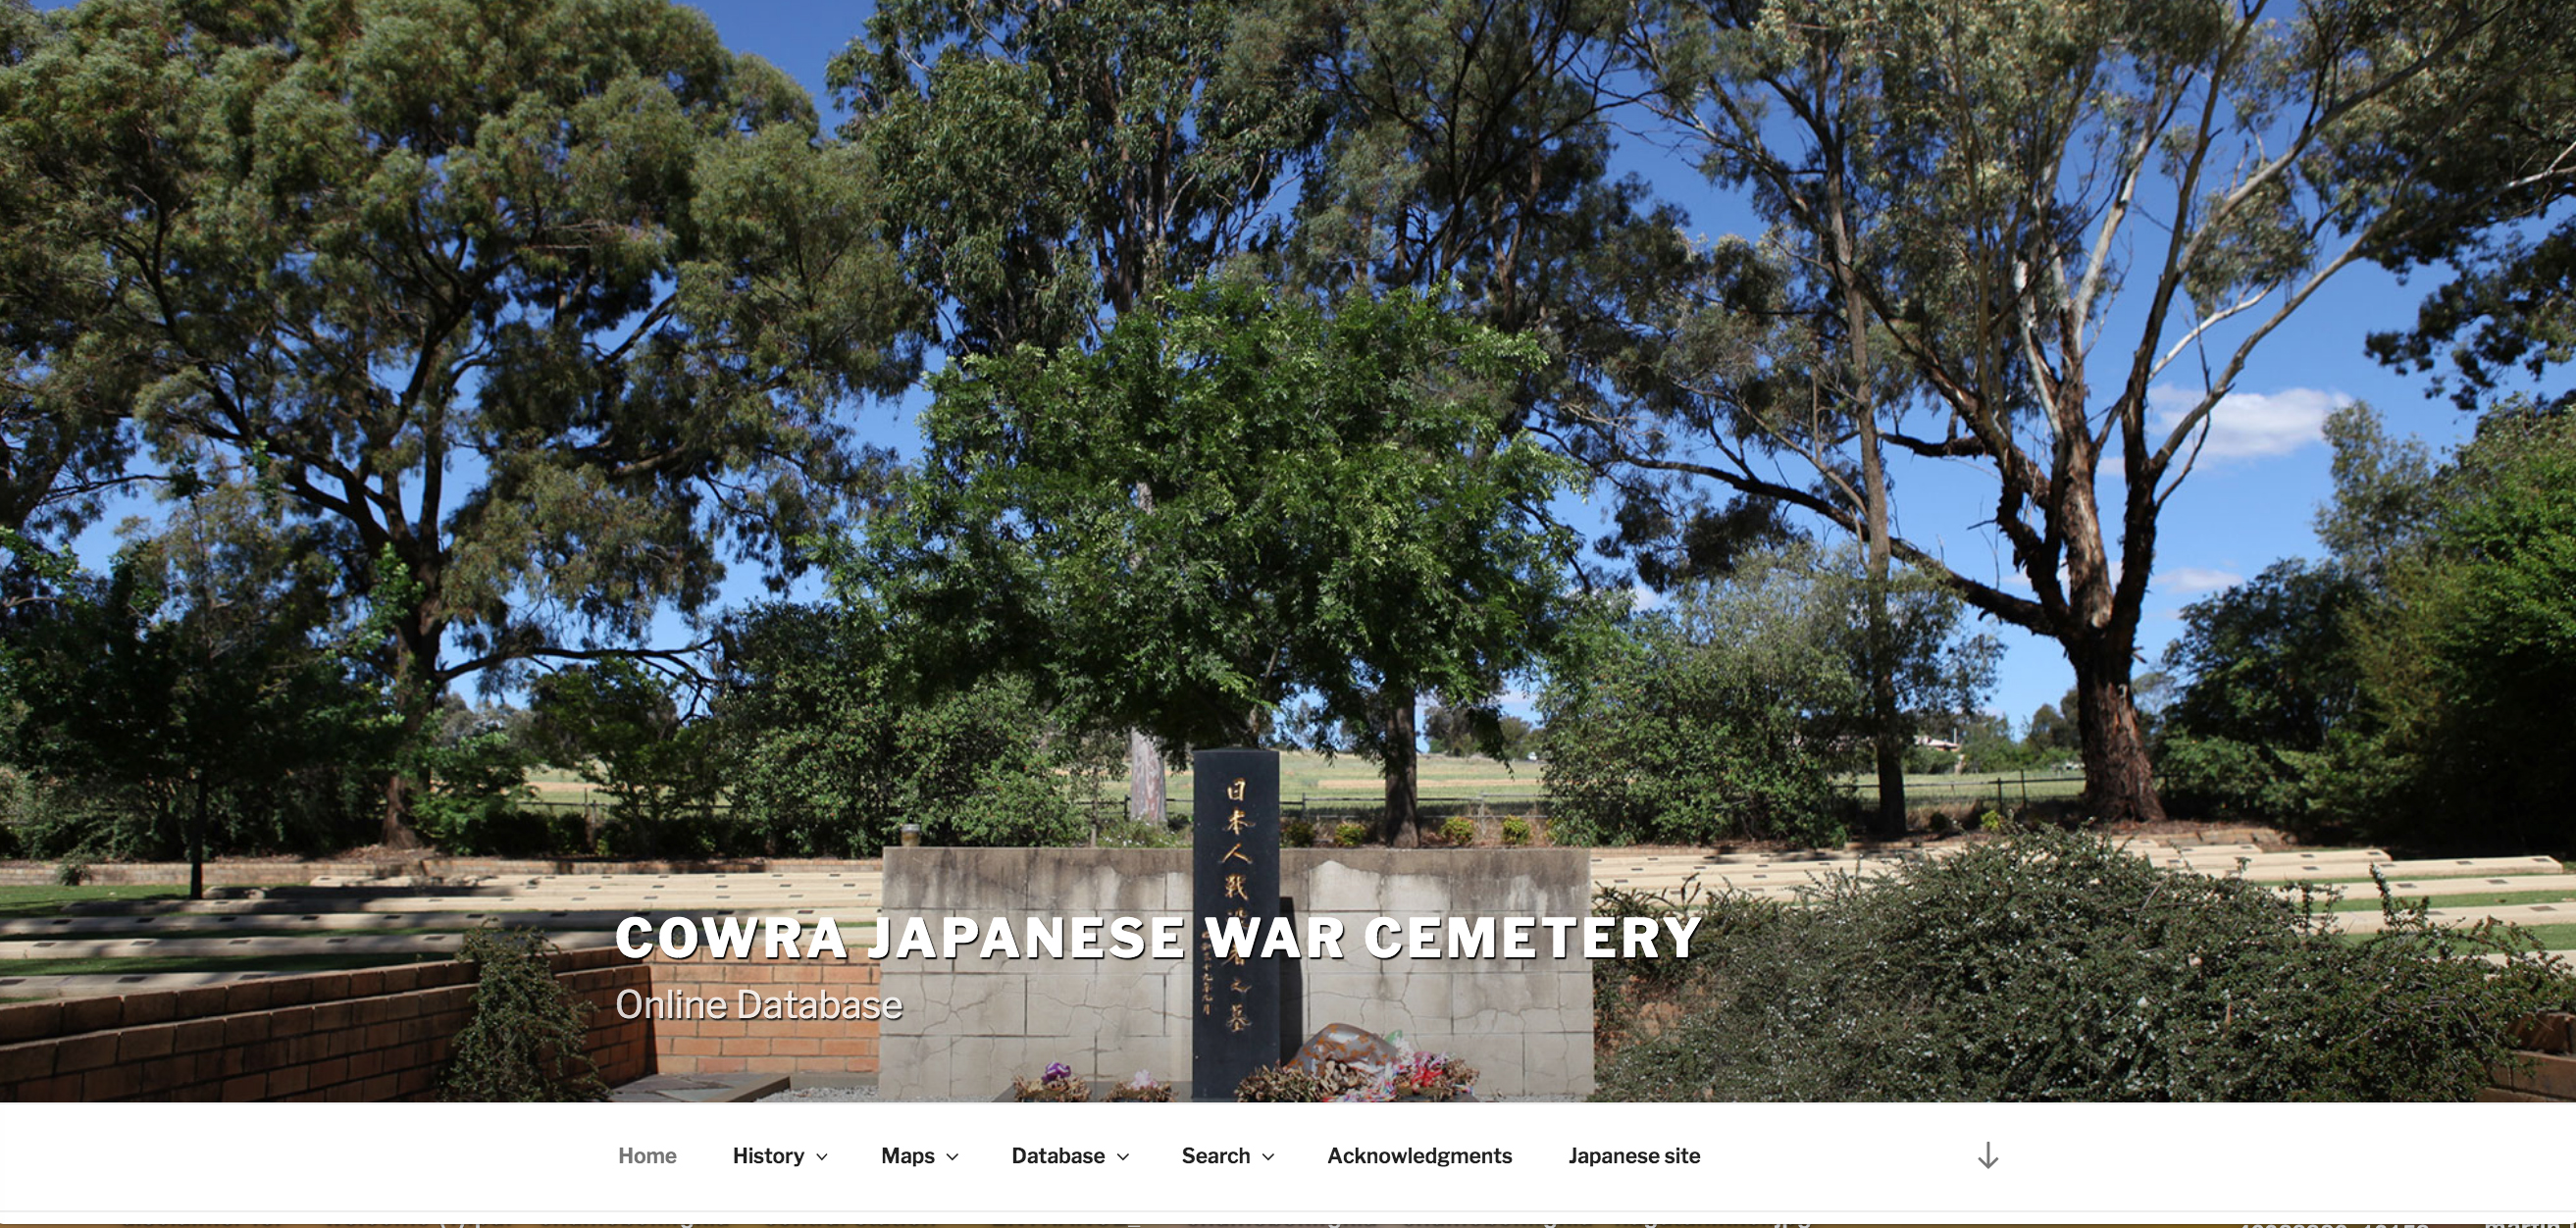 Cowra Japanese War Cemetery Database is now online